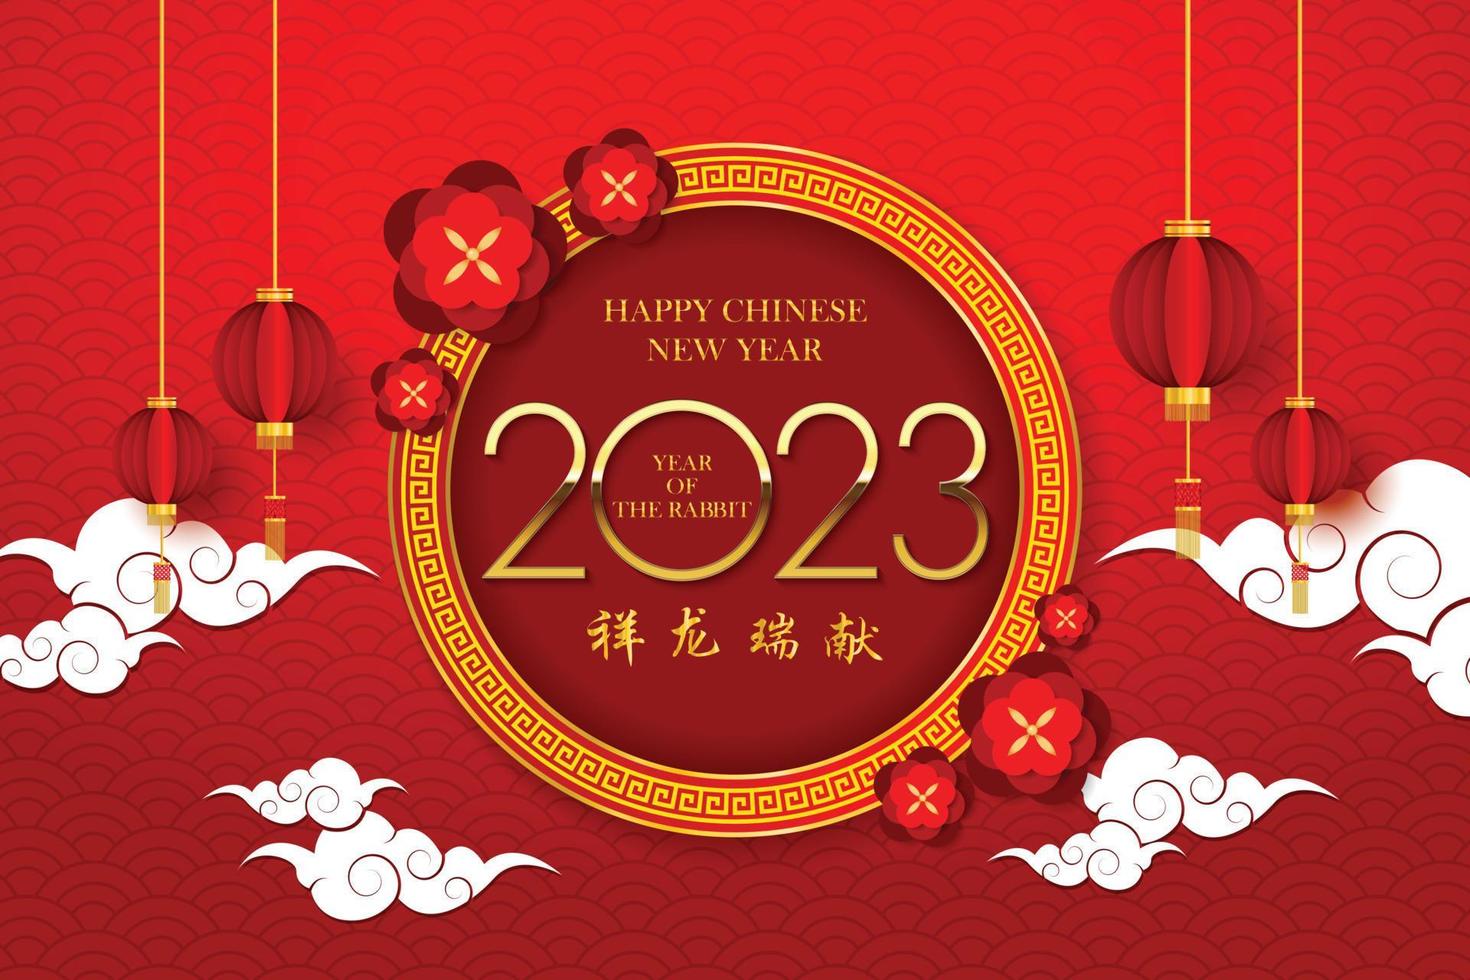 Happy Chinese New Year 2023 in golden Chinese pattern frame Chinese wording translation Chinese calendar for the rabbit of rabbit 2023 vector